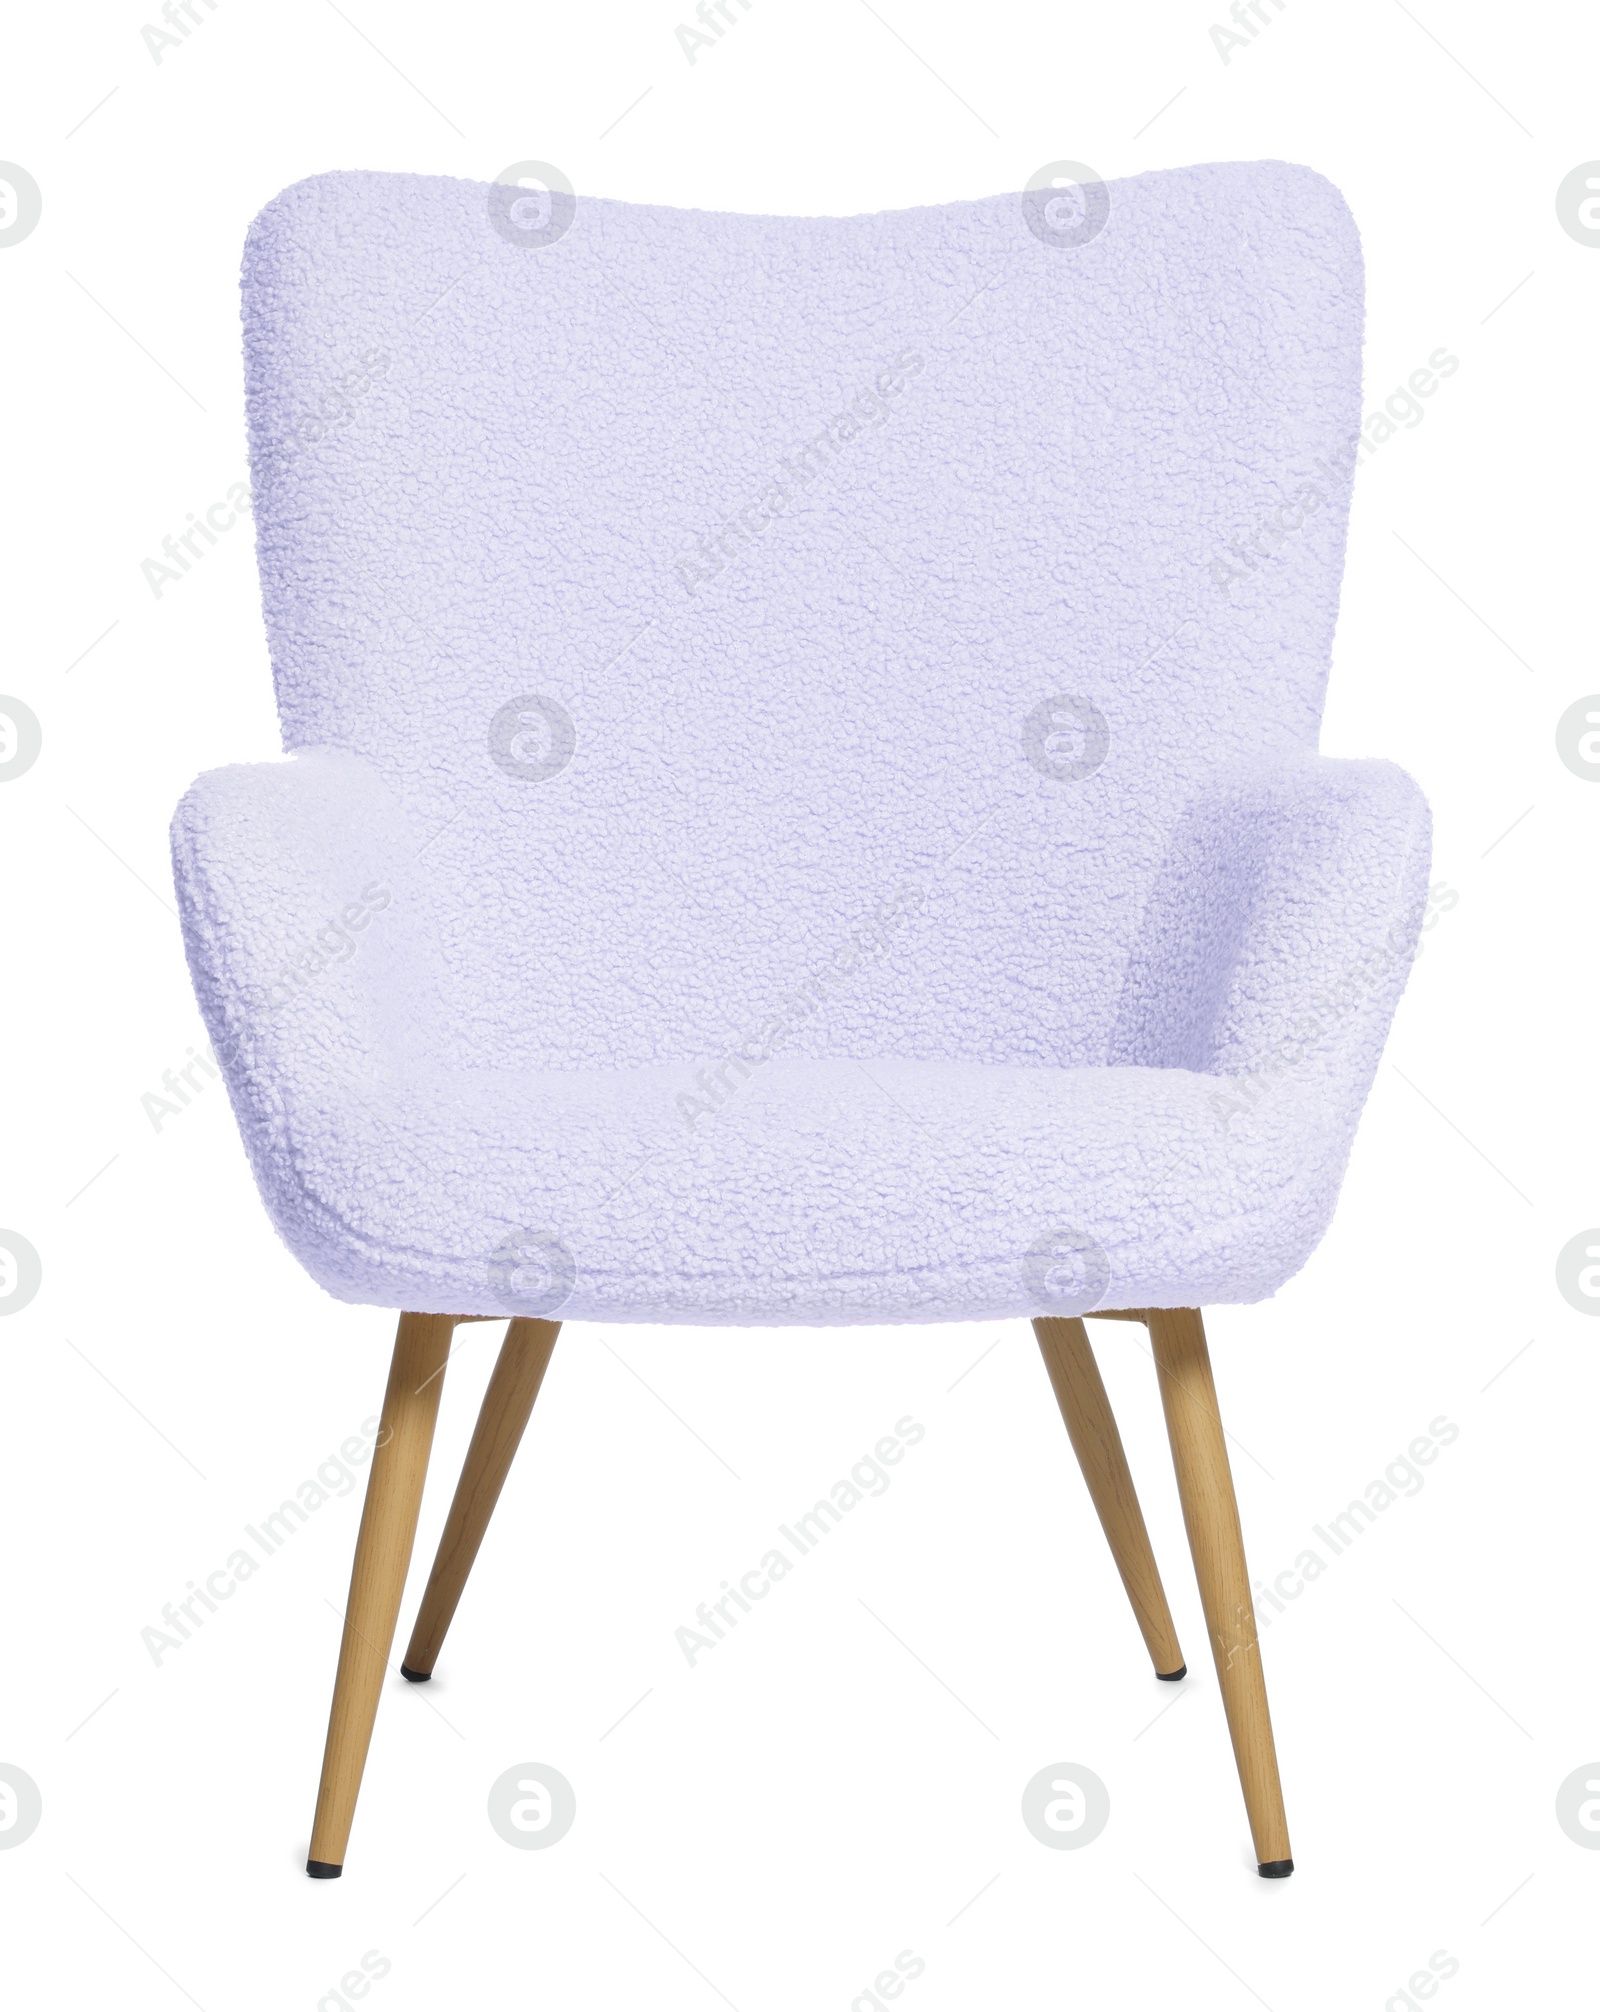 Image of One comfortable lavender color armchair isolated on white